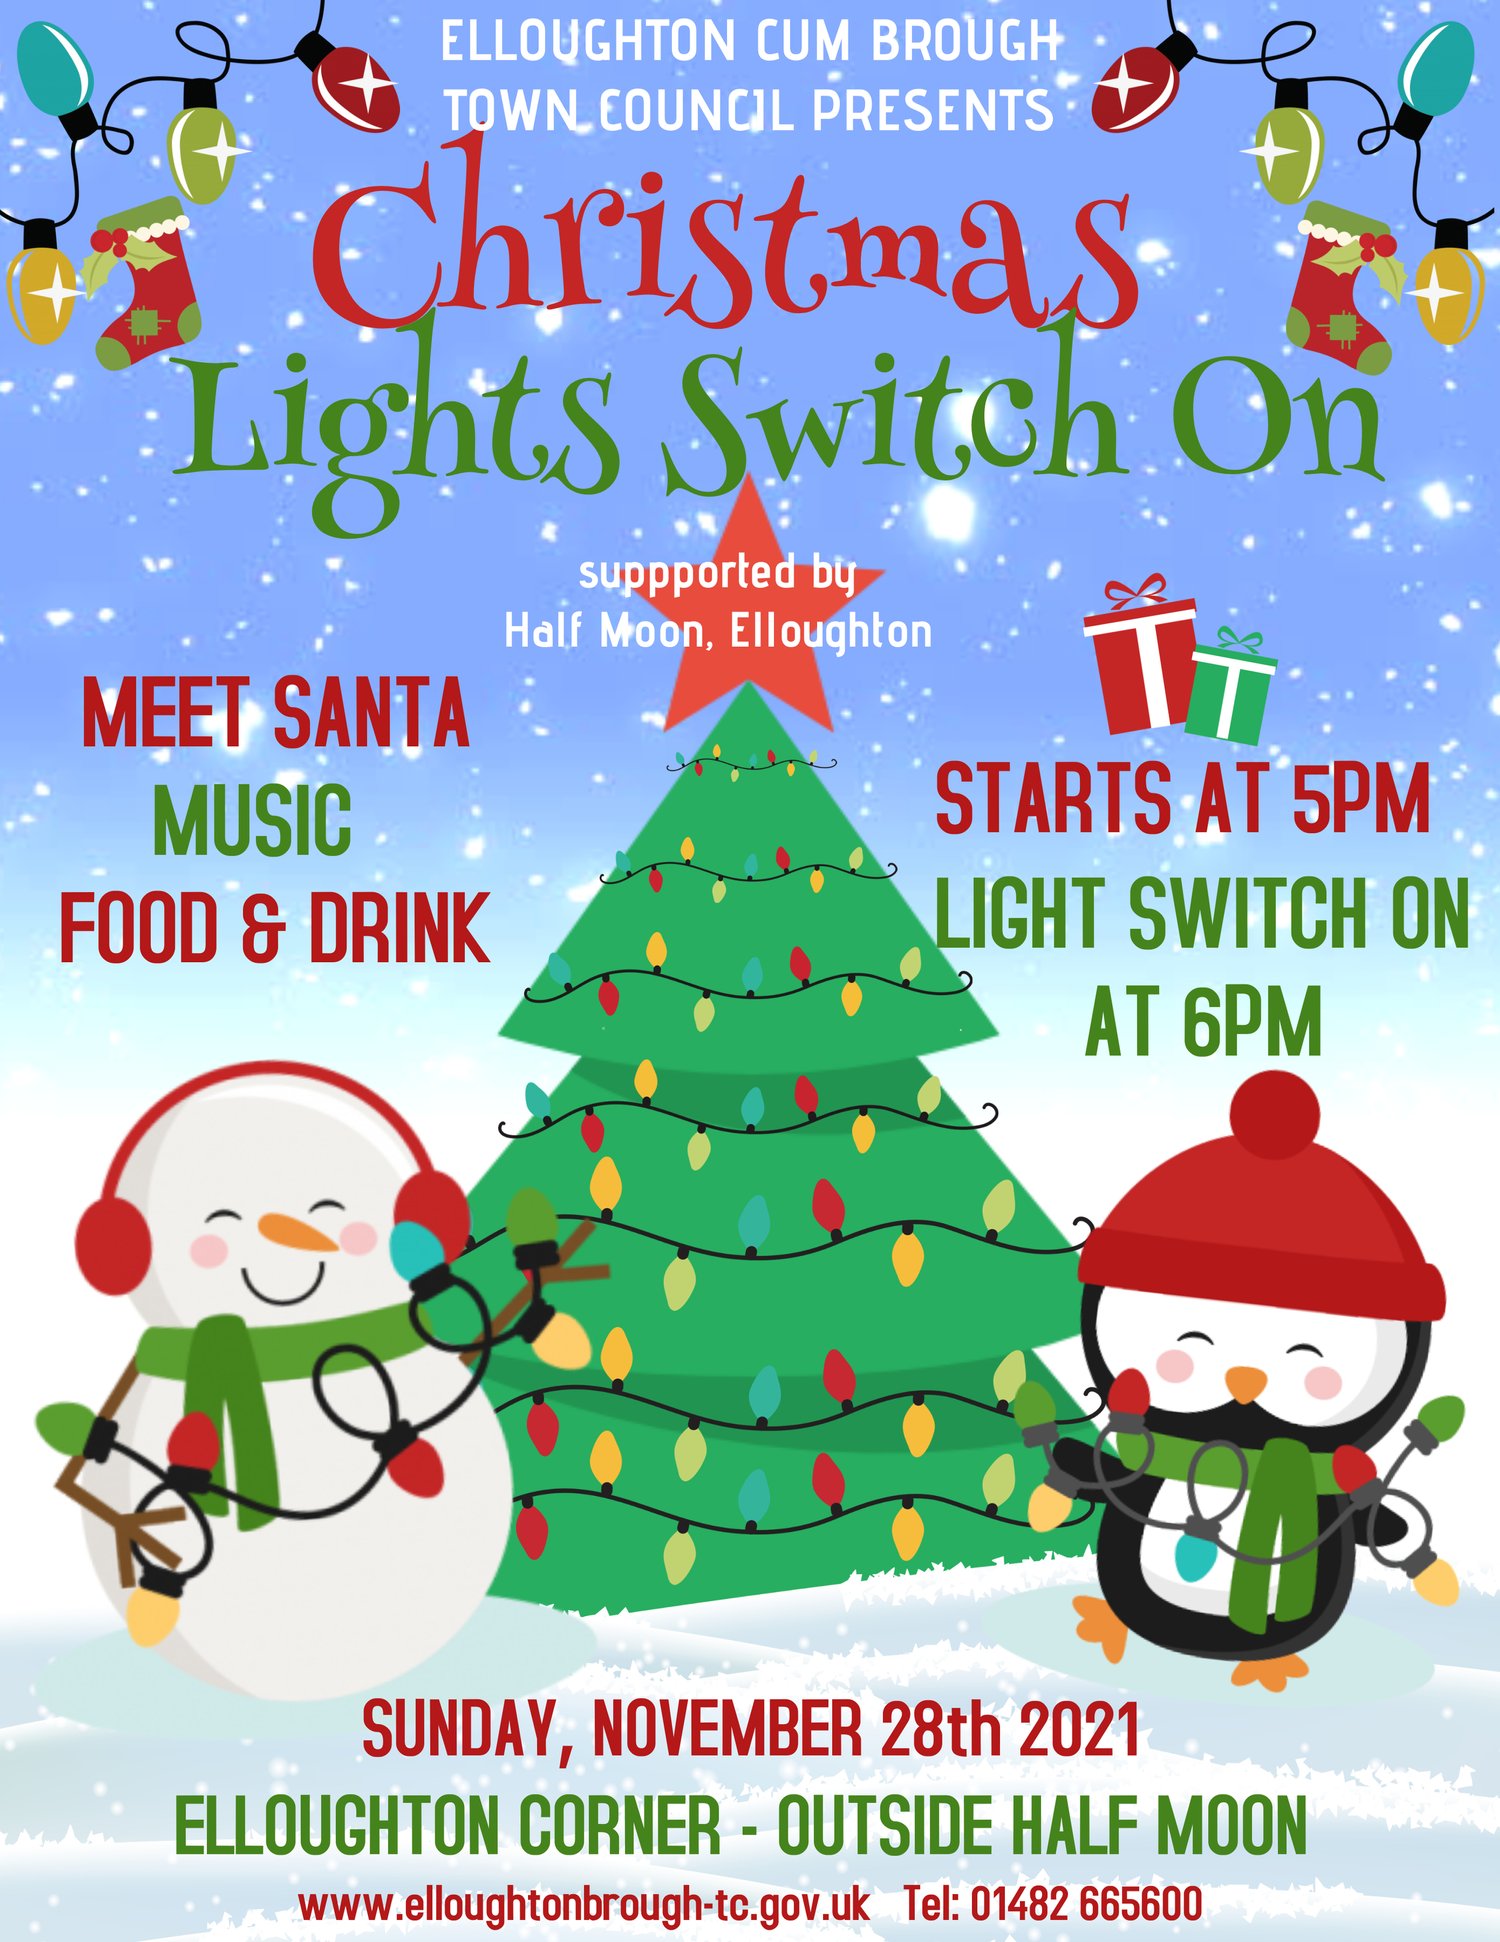 Christmas Light Switch On — Elloughton cum Brough Town Council